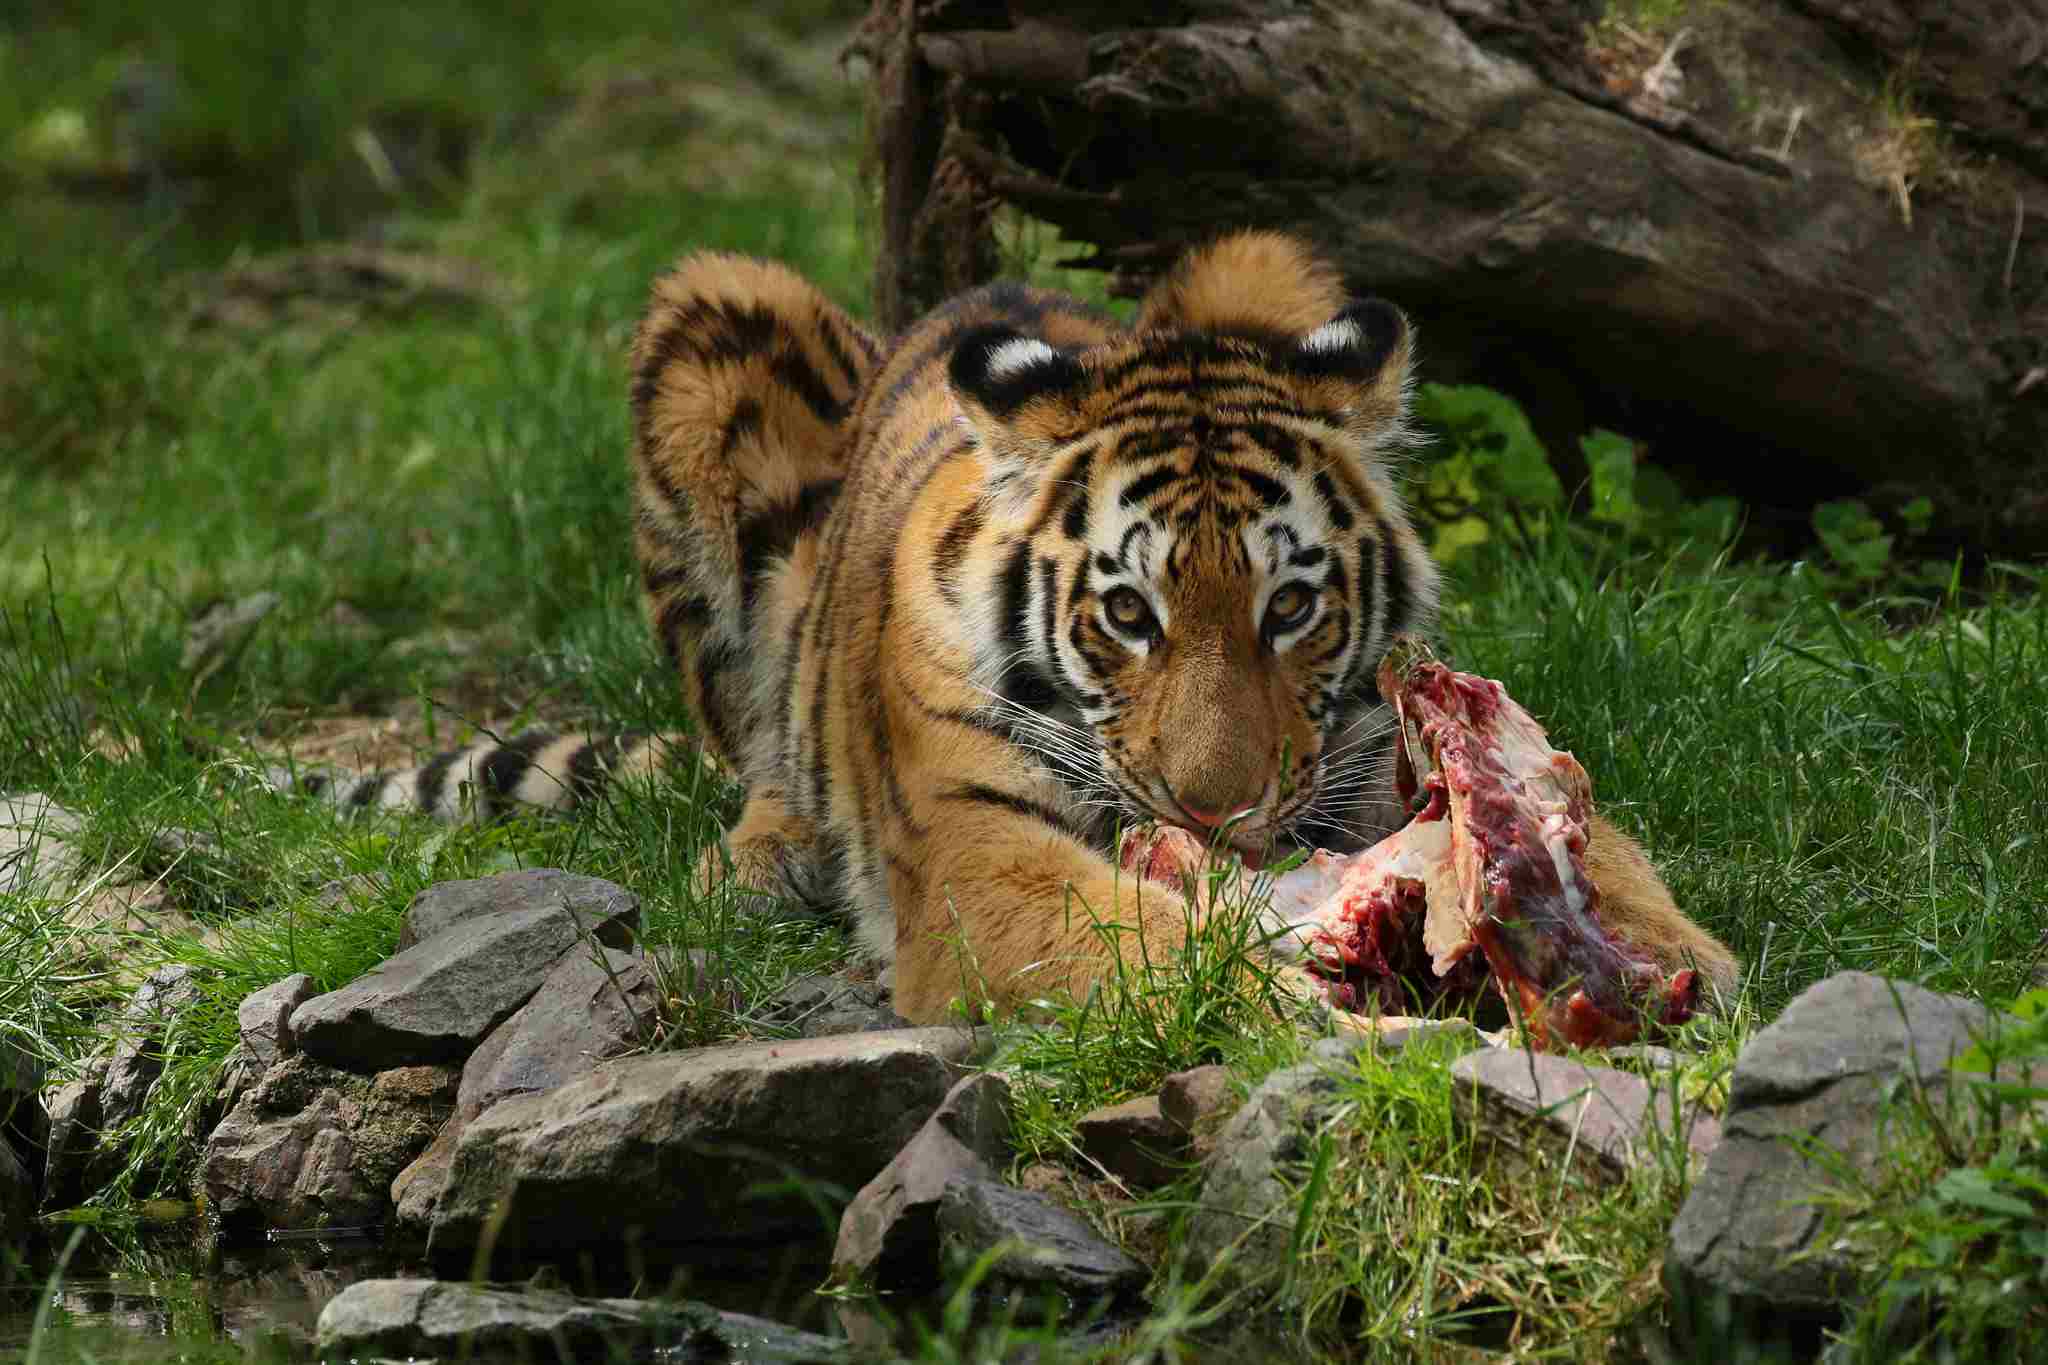 Do Tigers Eat Monkeys: In the Absence of Preferred Prey, Tigers May Feed On Other Predators like Snakes, Leopards and Bears (Credit: zoofanatic 2017 .CC BY 2.0.)